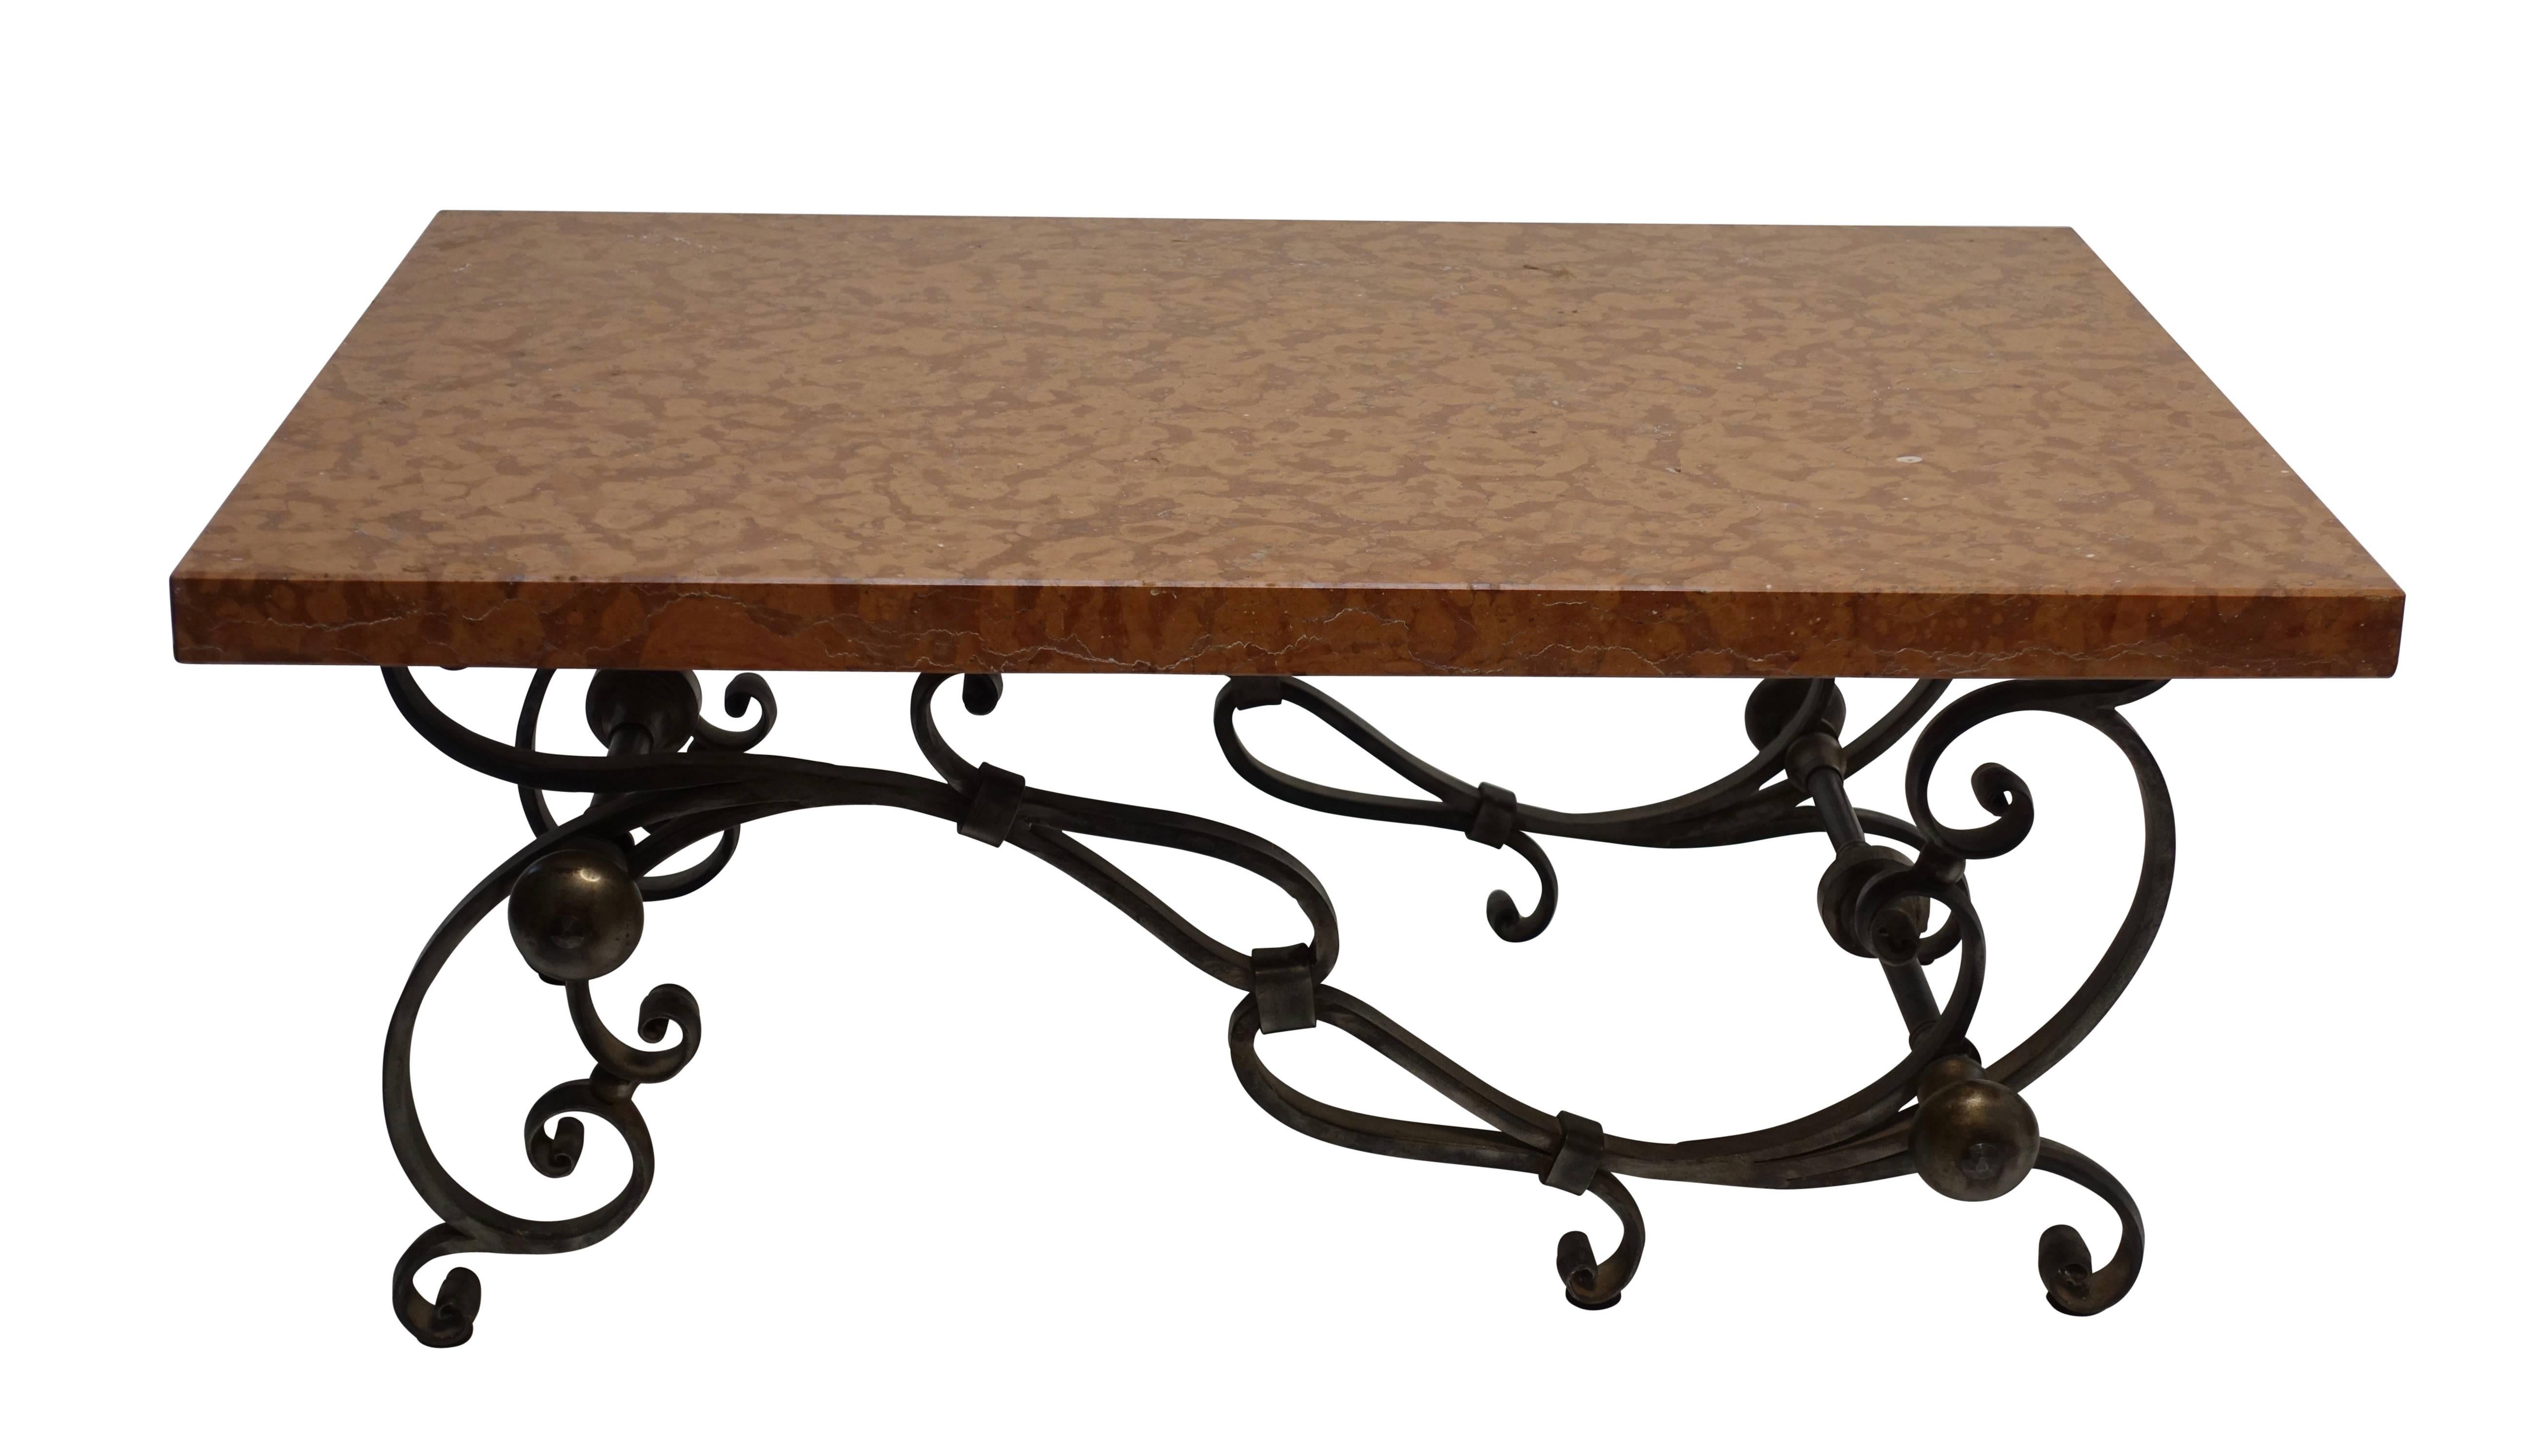 Art Nouveau style scrolling polished steel base with a 1.5 inch thick rouge color marble top. Wonderfully stylized interconnected scrolling legs and supports, having an asymmetrical shape.